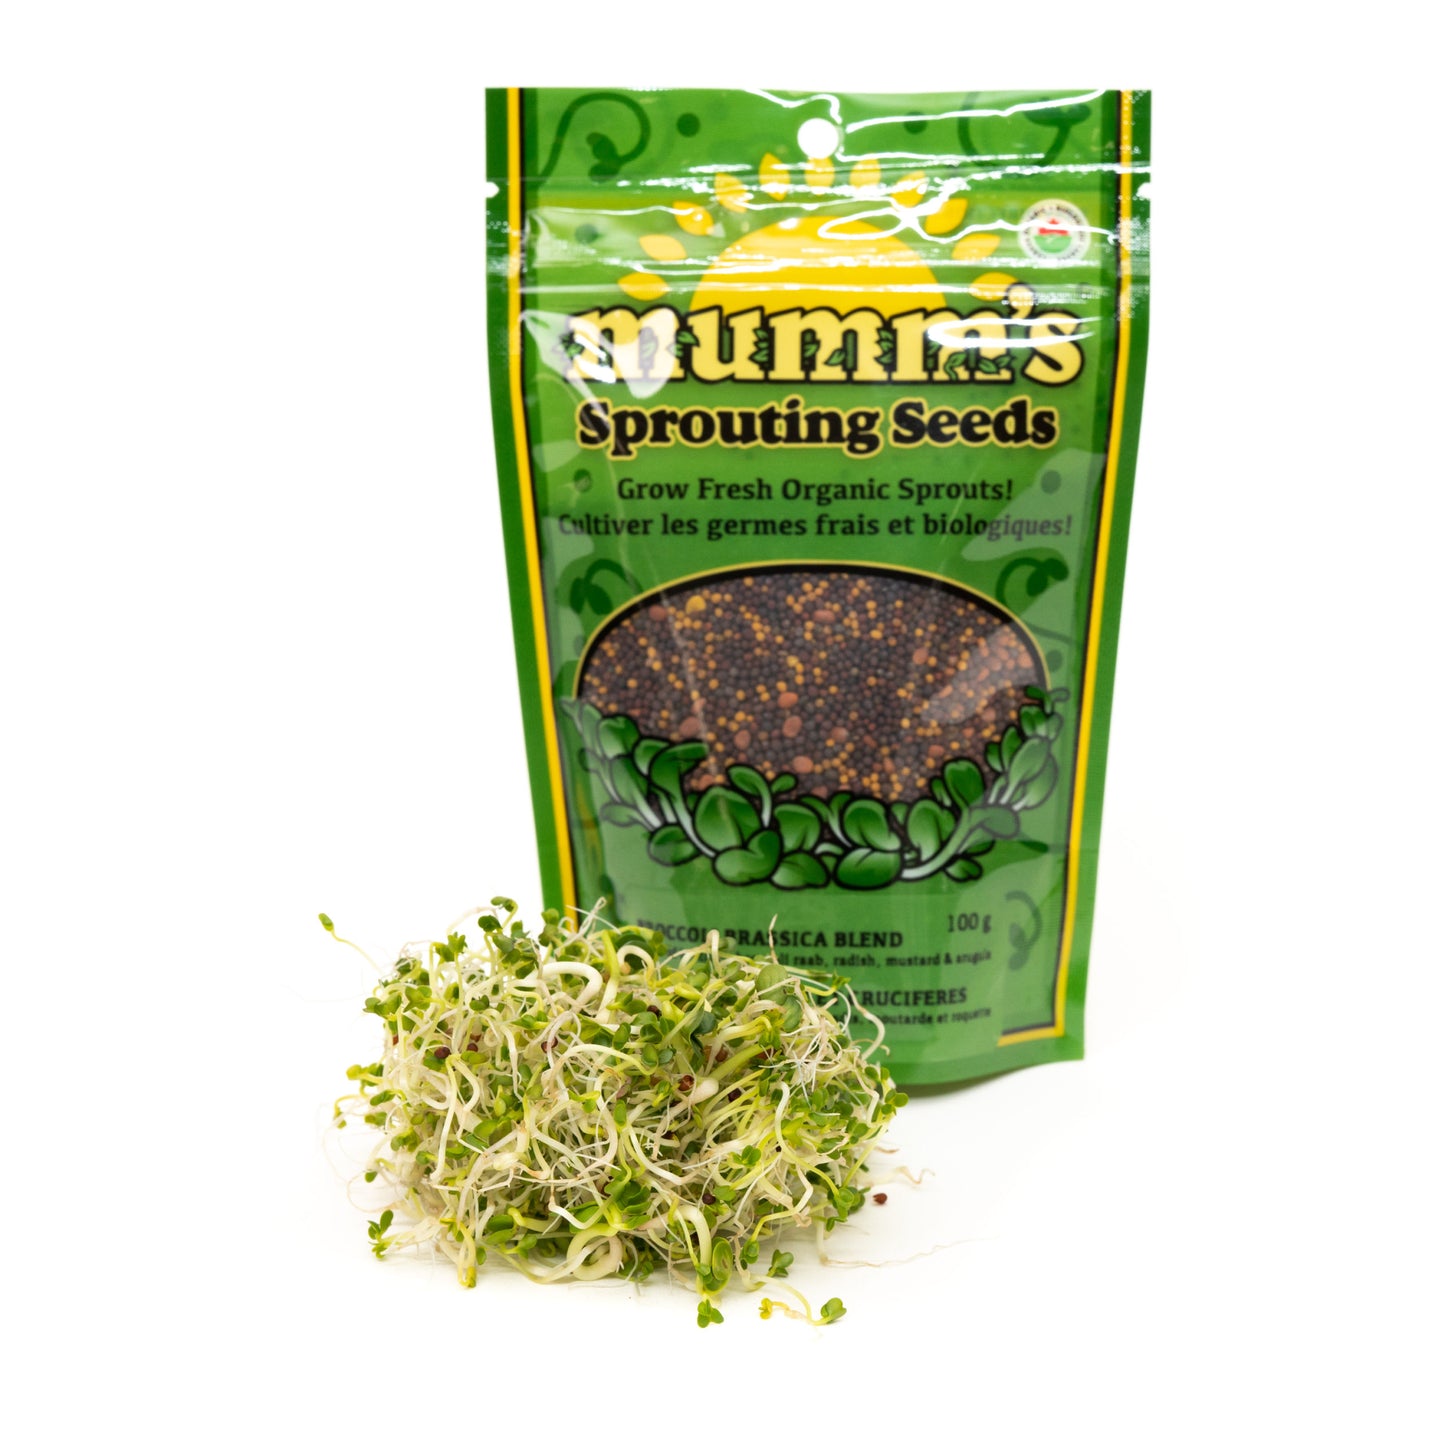 Mumm's Sprouting Seeds Broccoli Brassica Blend